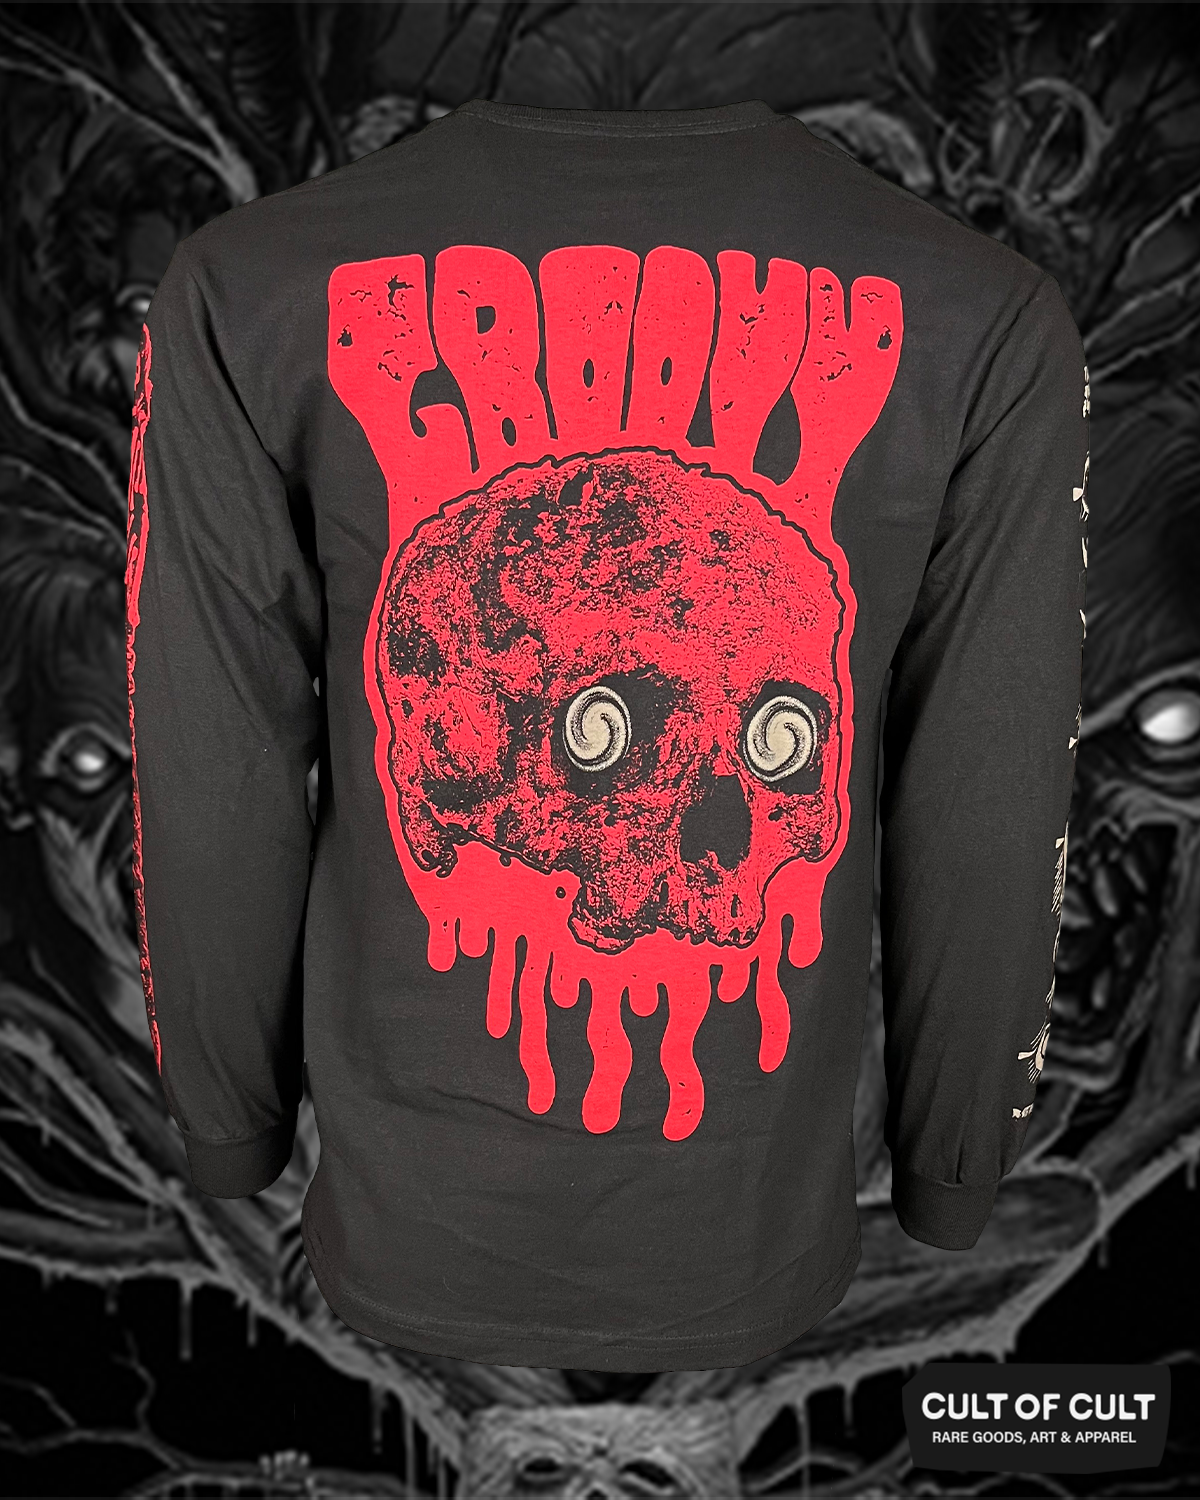 Evil Dead 2 Groovy LS Back View